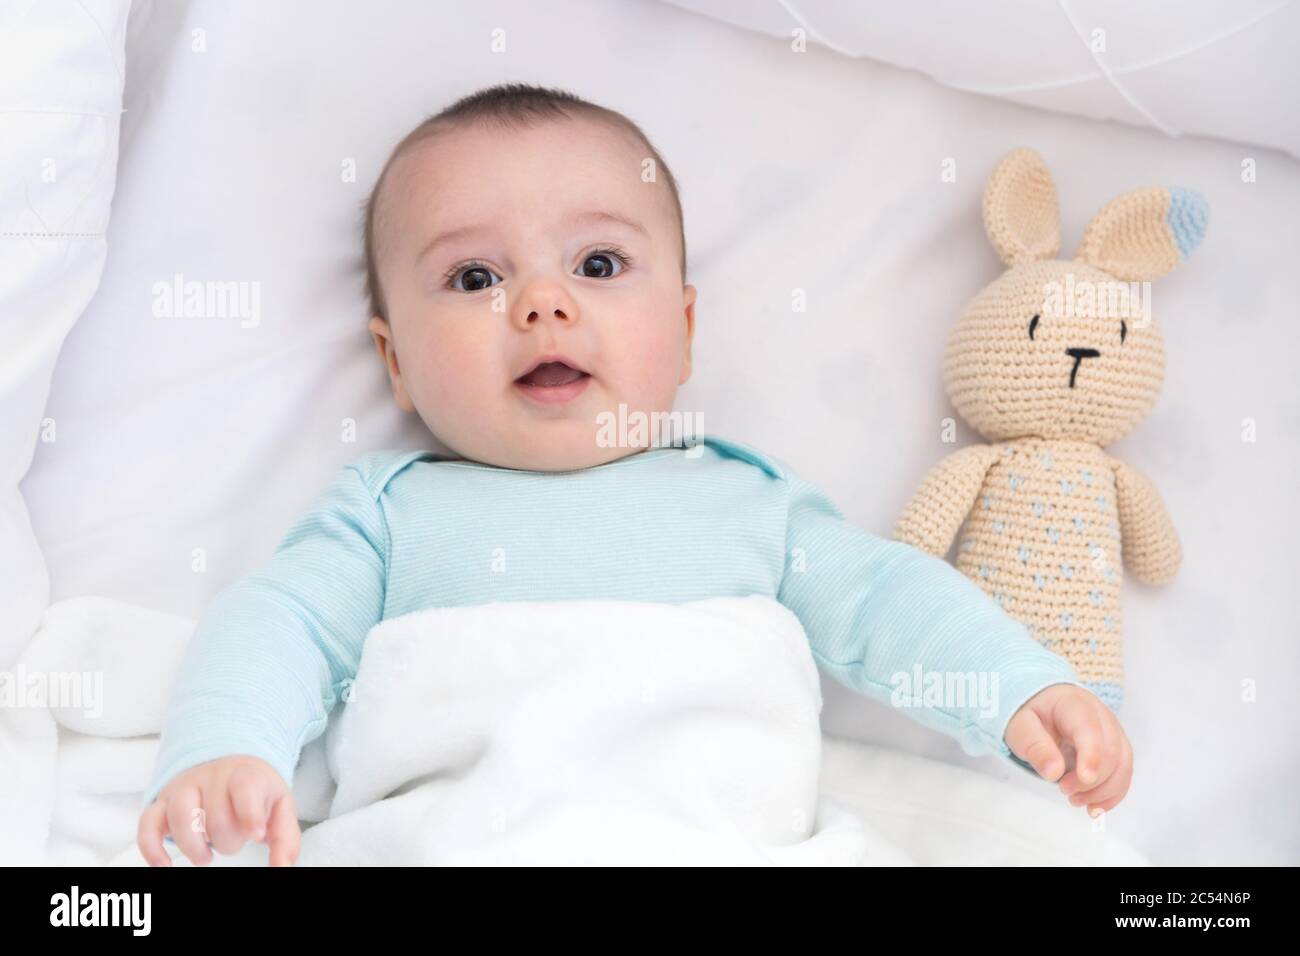 Happy baby newly awake in his crib and with his bunny doll. Light blue pajama and white bed sheets. Stock Photo